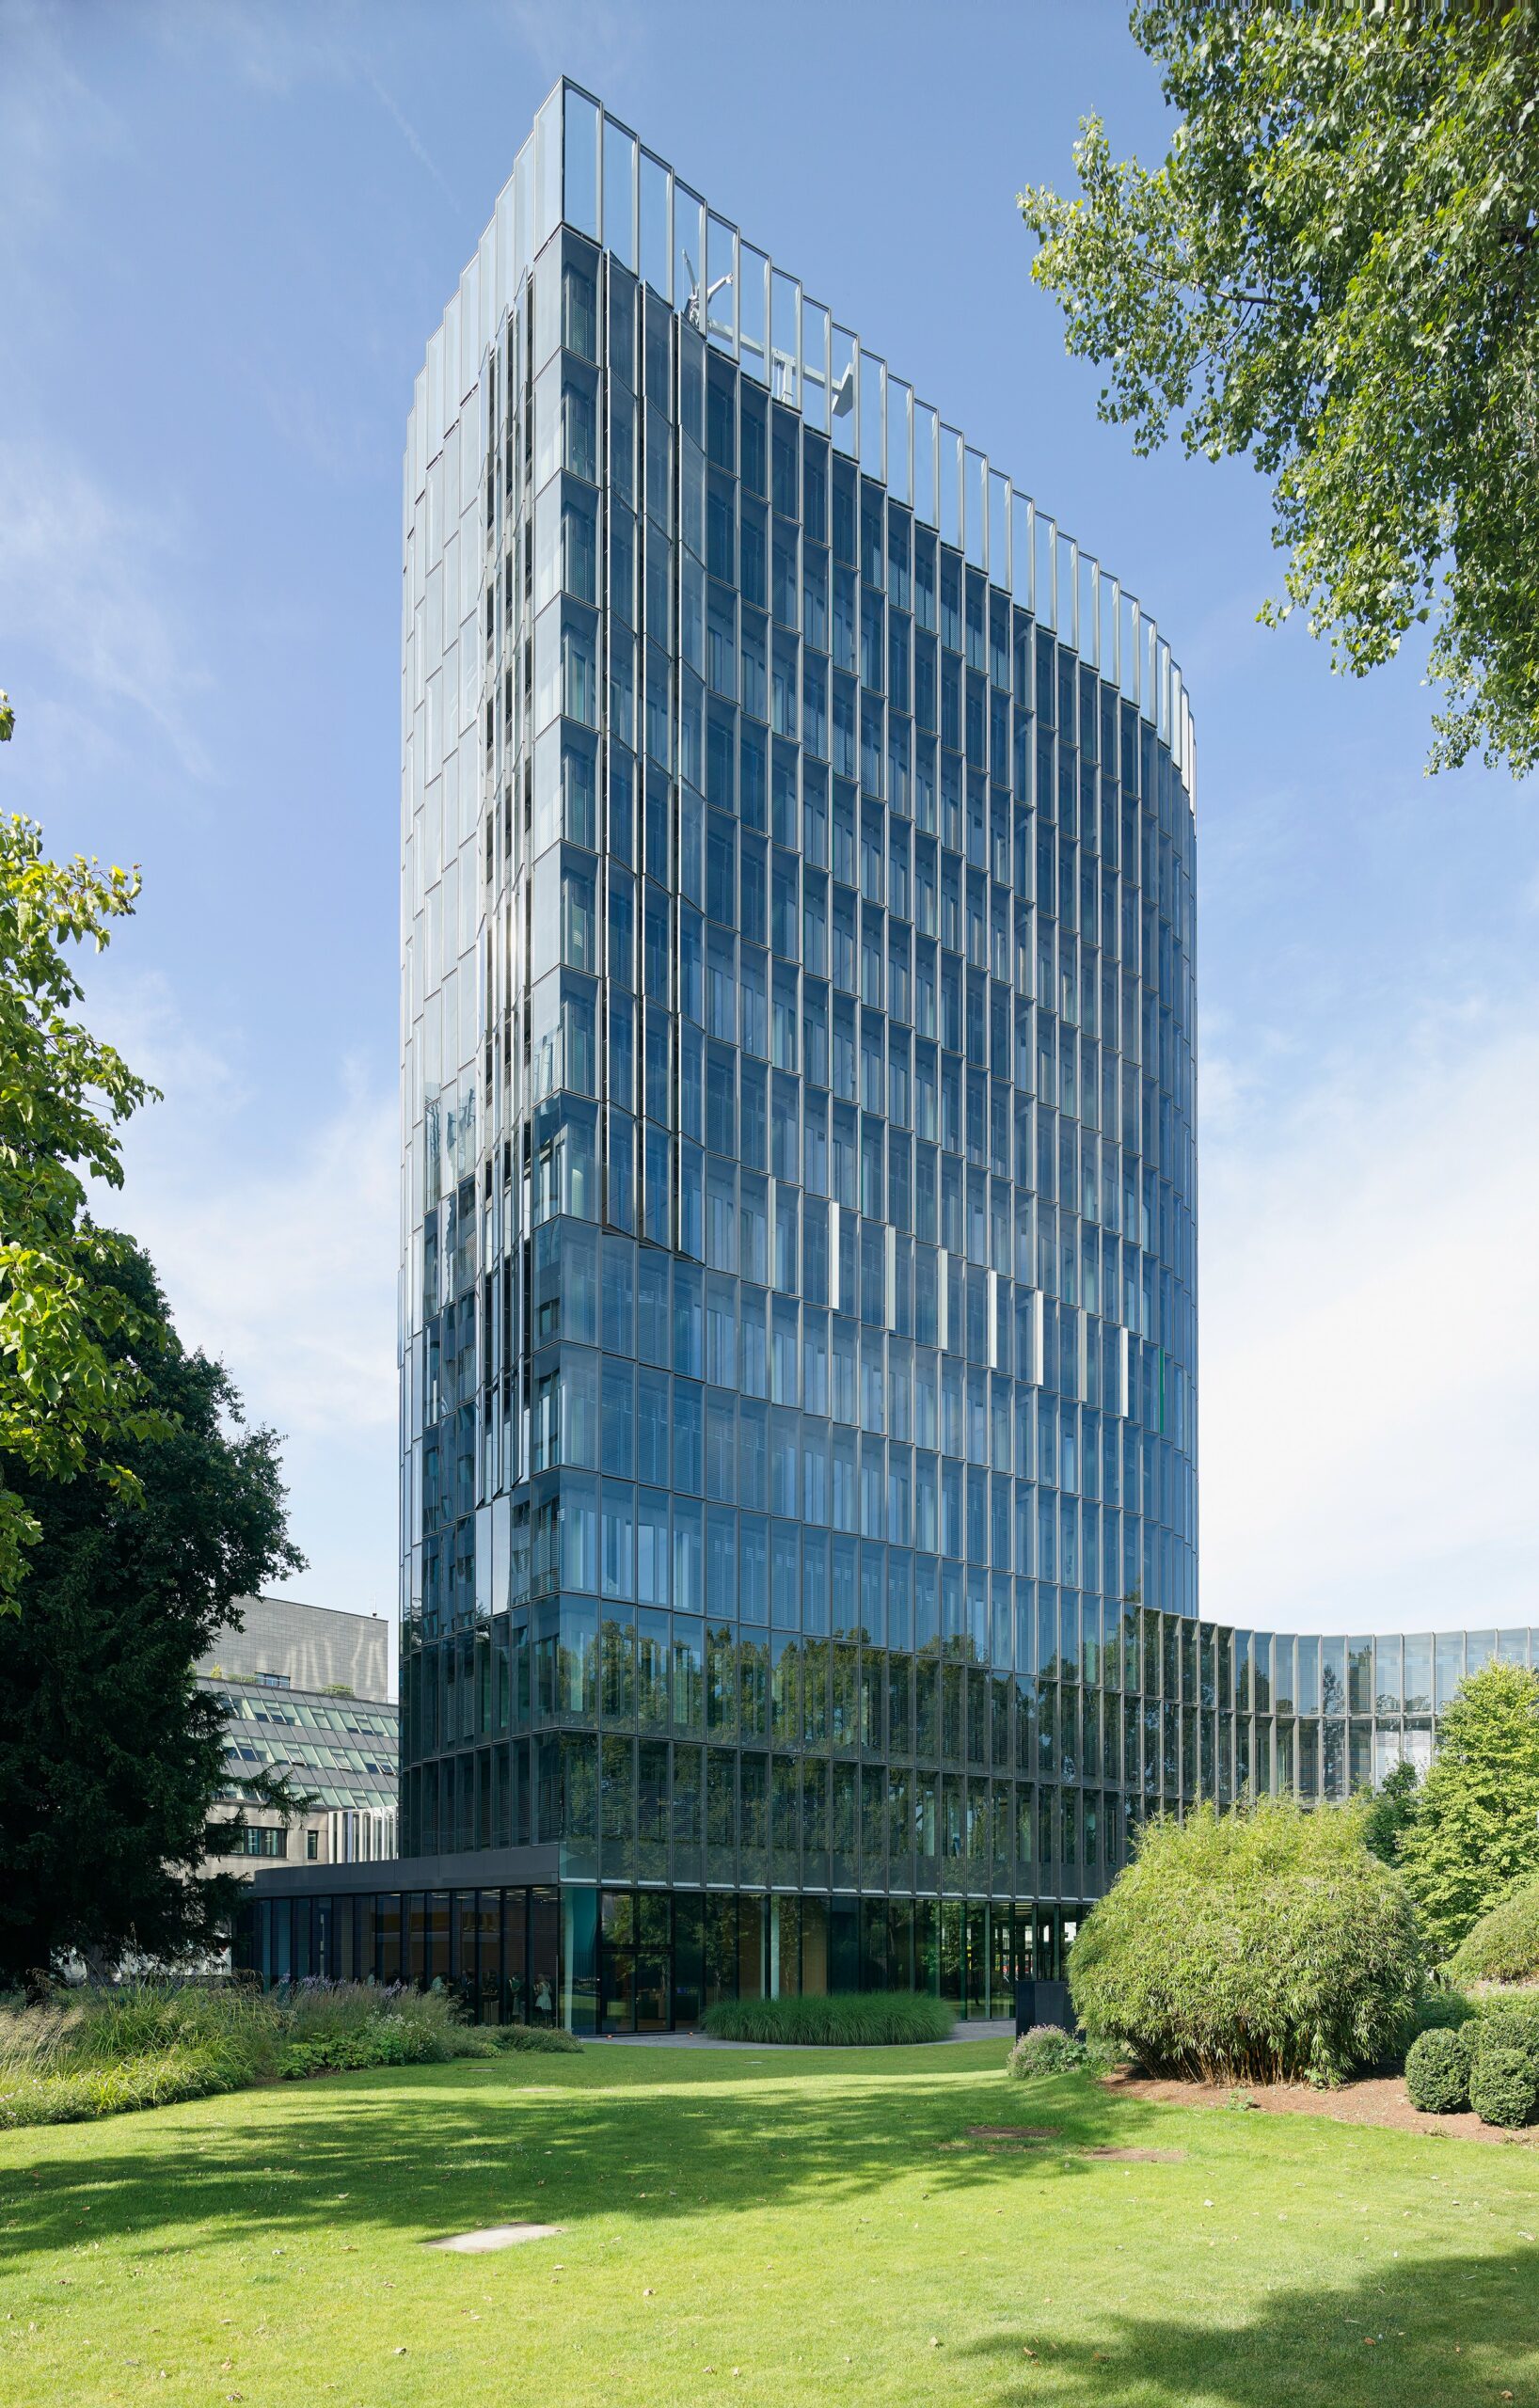 The headquarters of KfW IPEX-Bank are located in the European financial centre of Frankfurt am Main, in close proximity to the European Central Bank and other German and international banks.